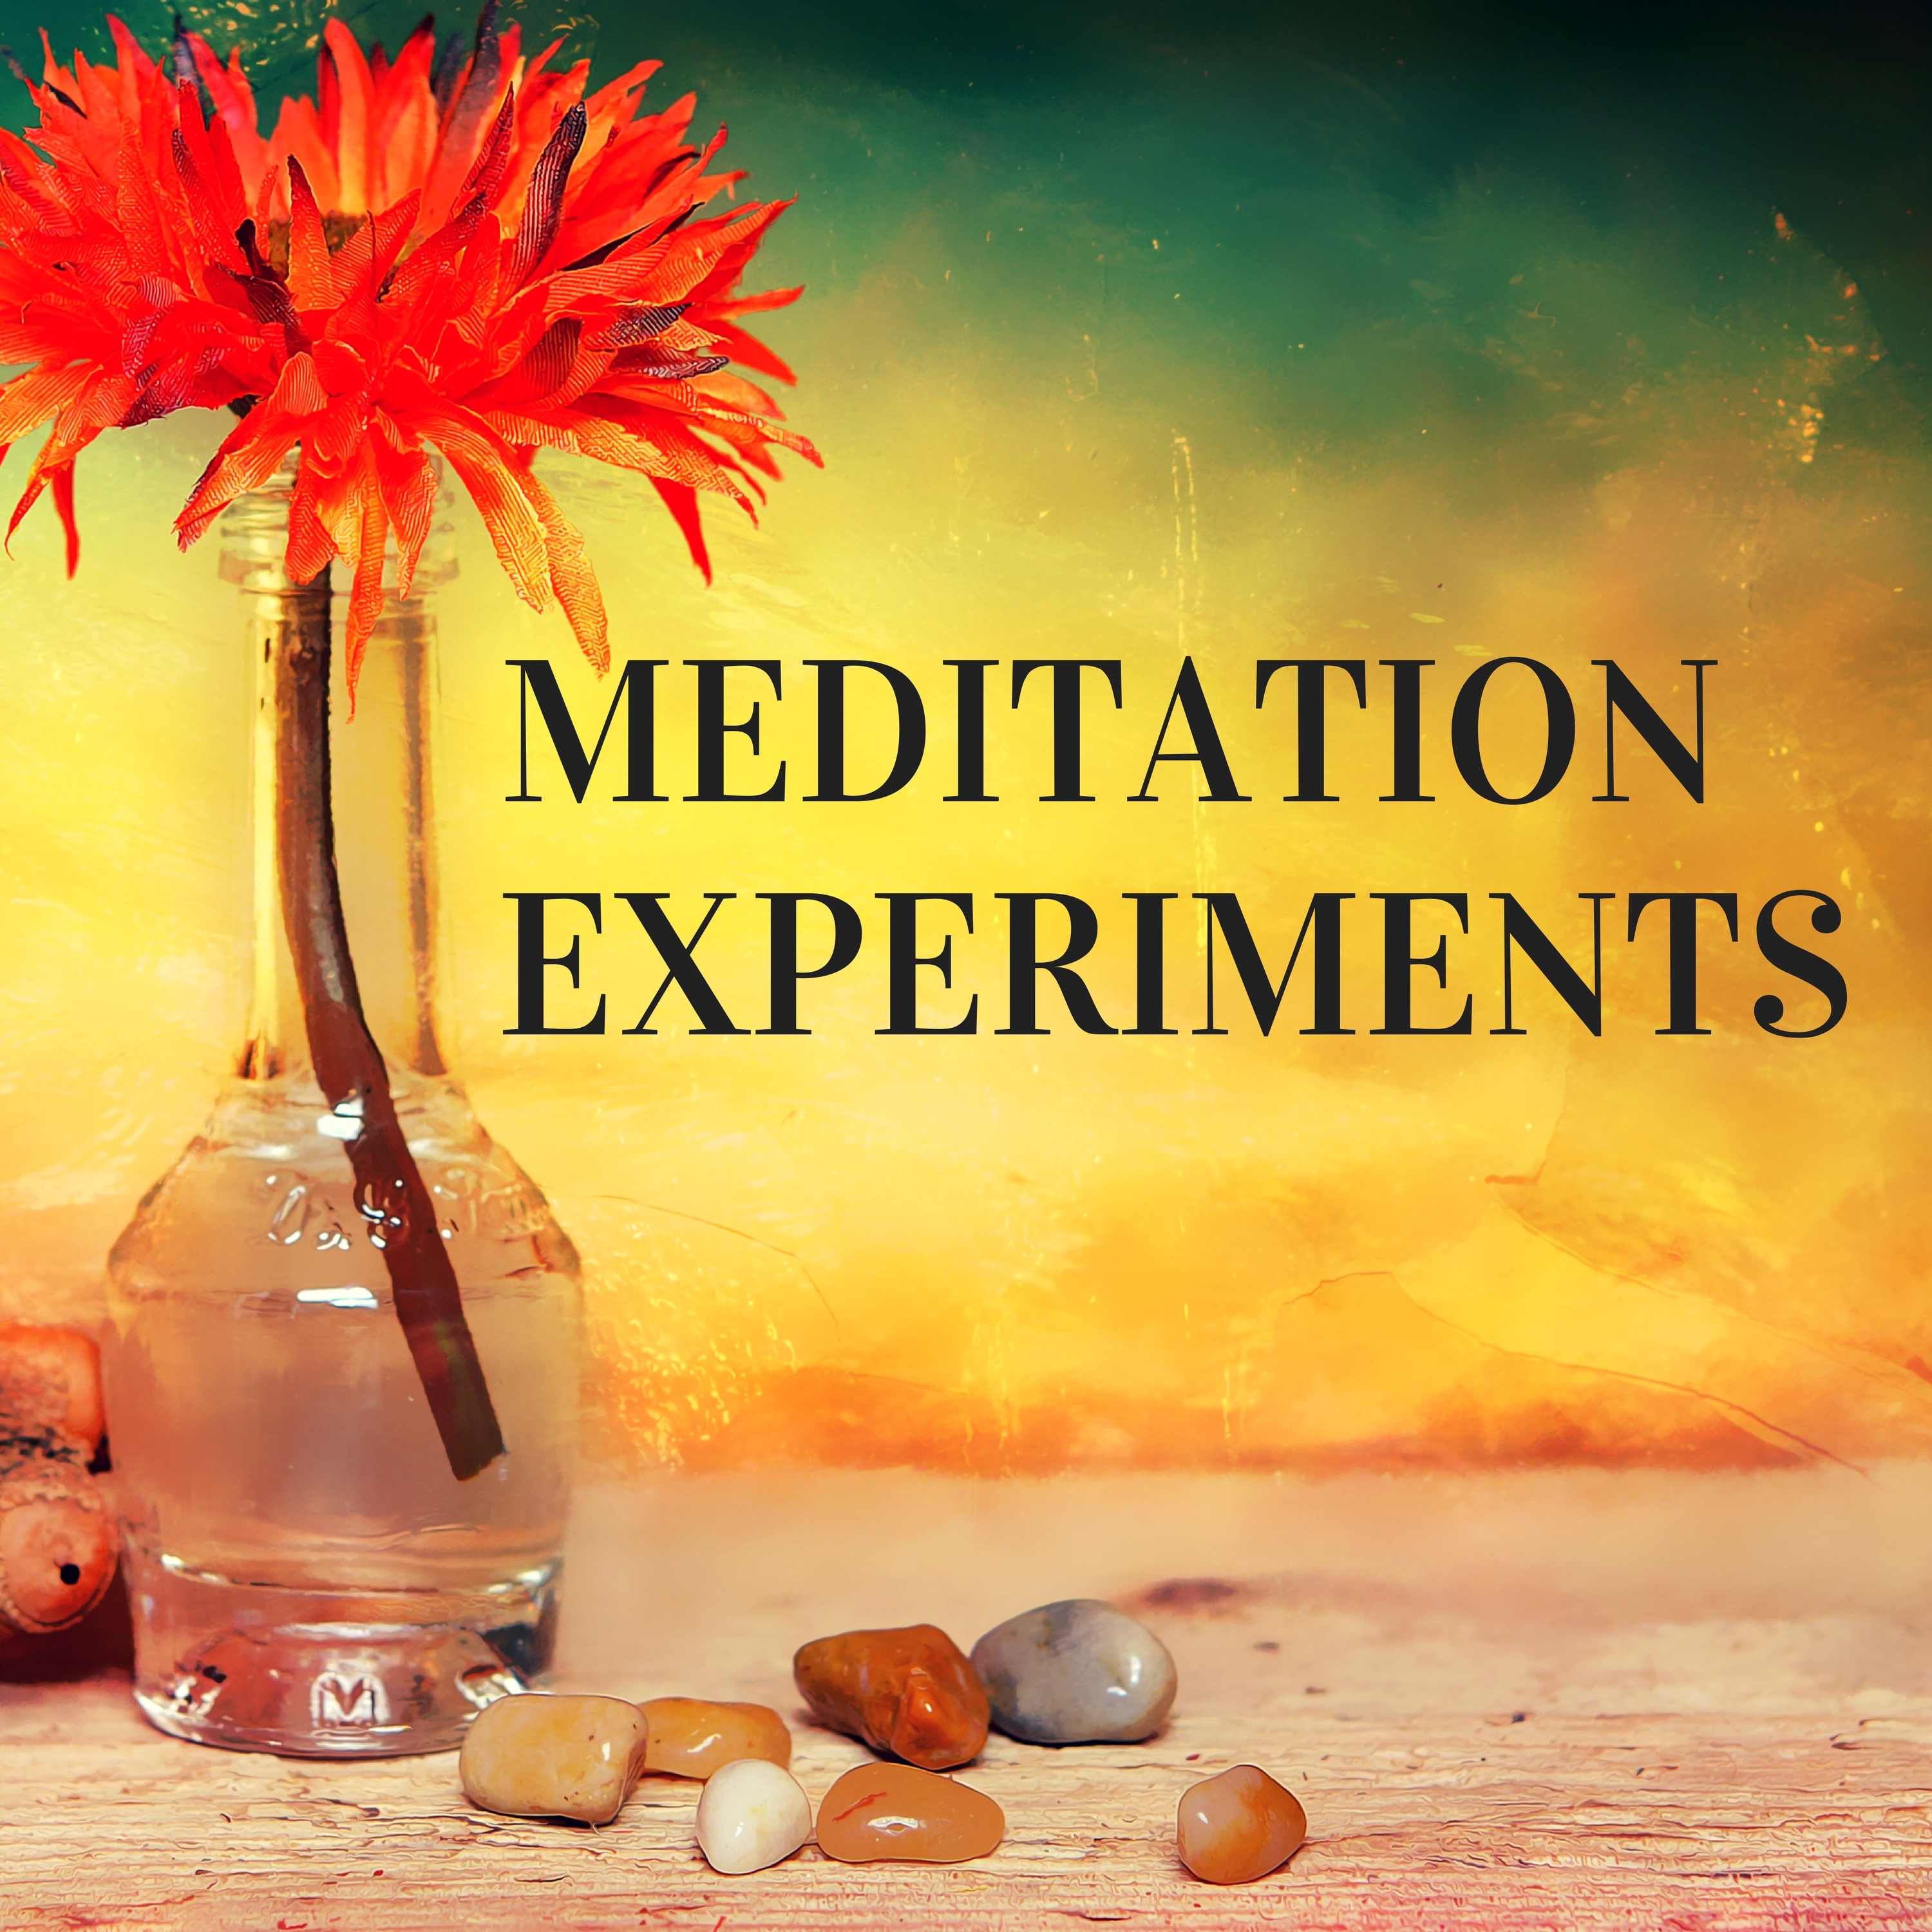 Meditation Experiments: Pranayama Yoga Music to Focus on the Breath and Being Aware